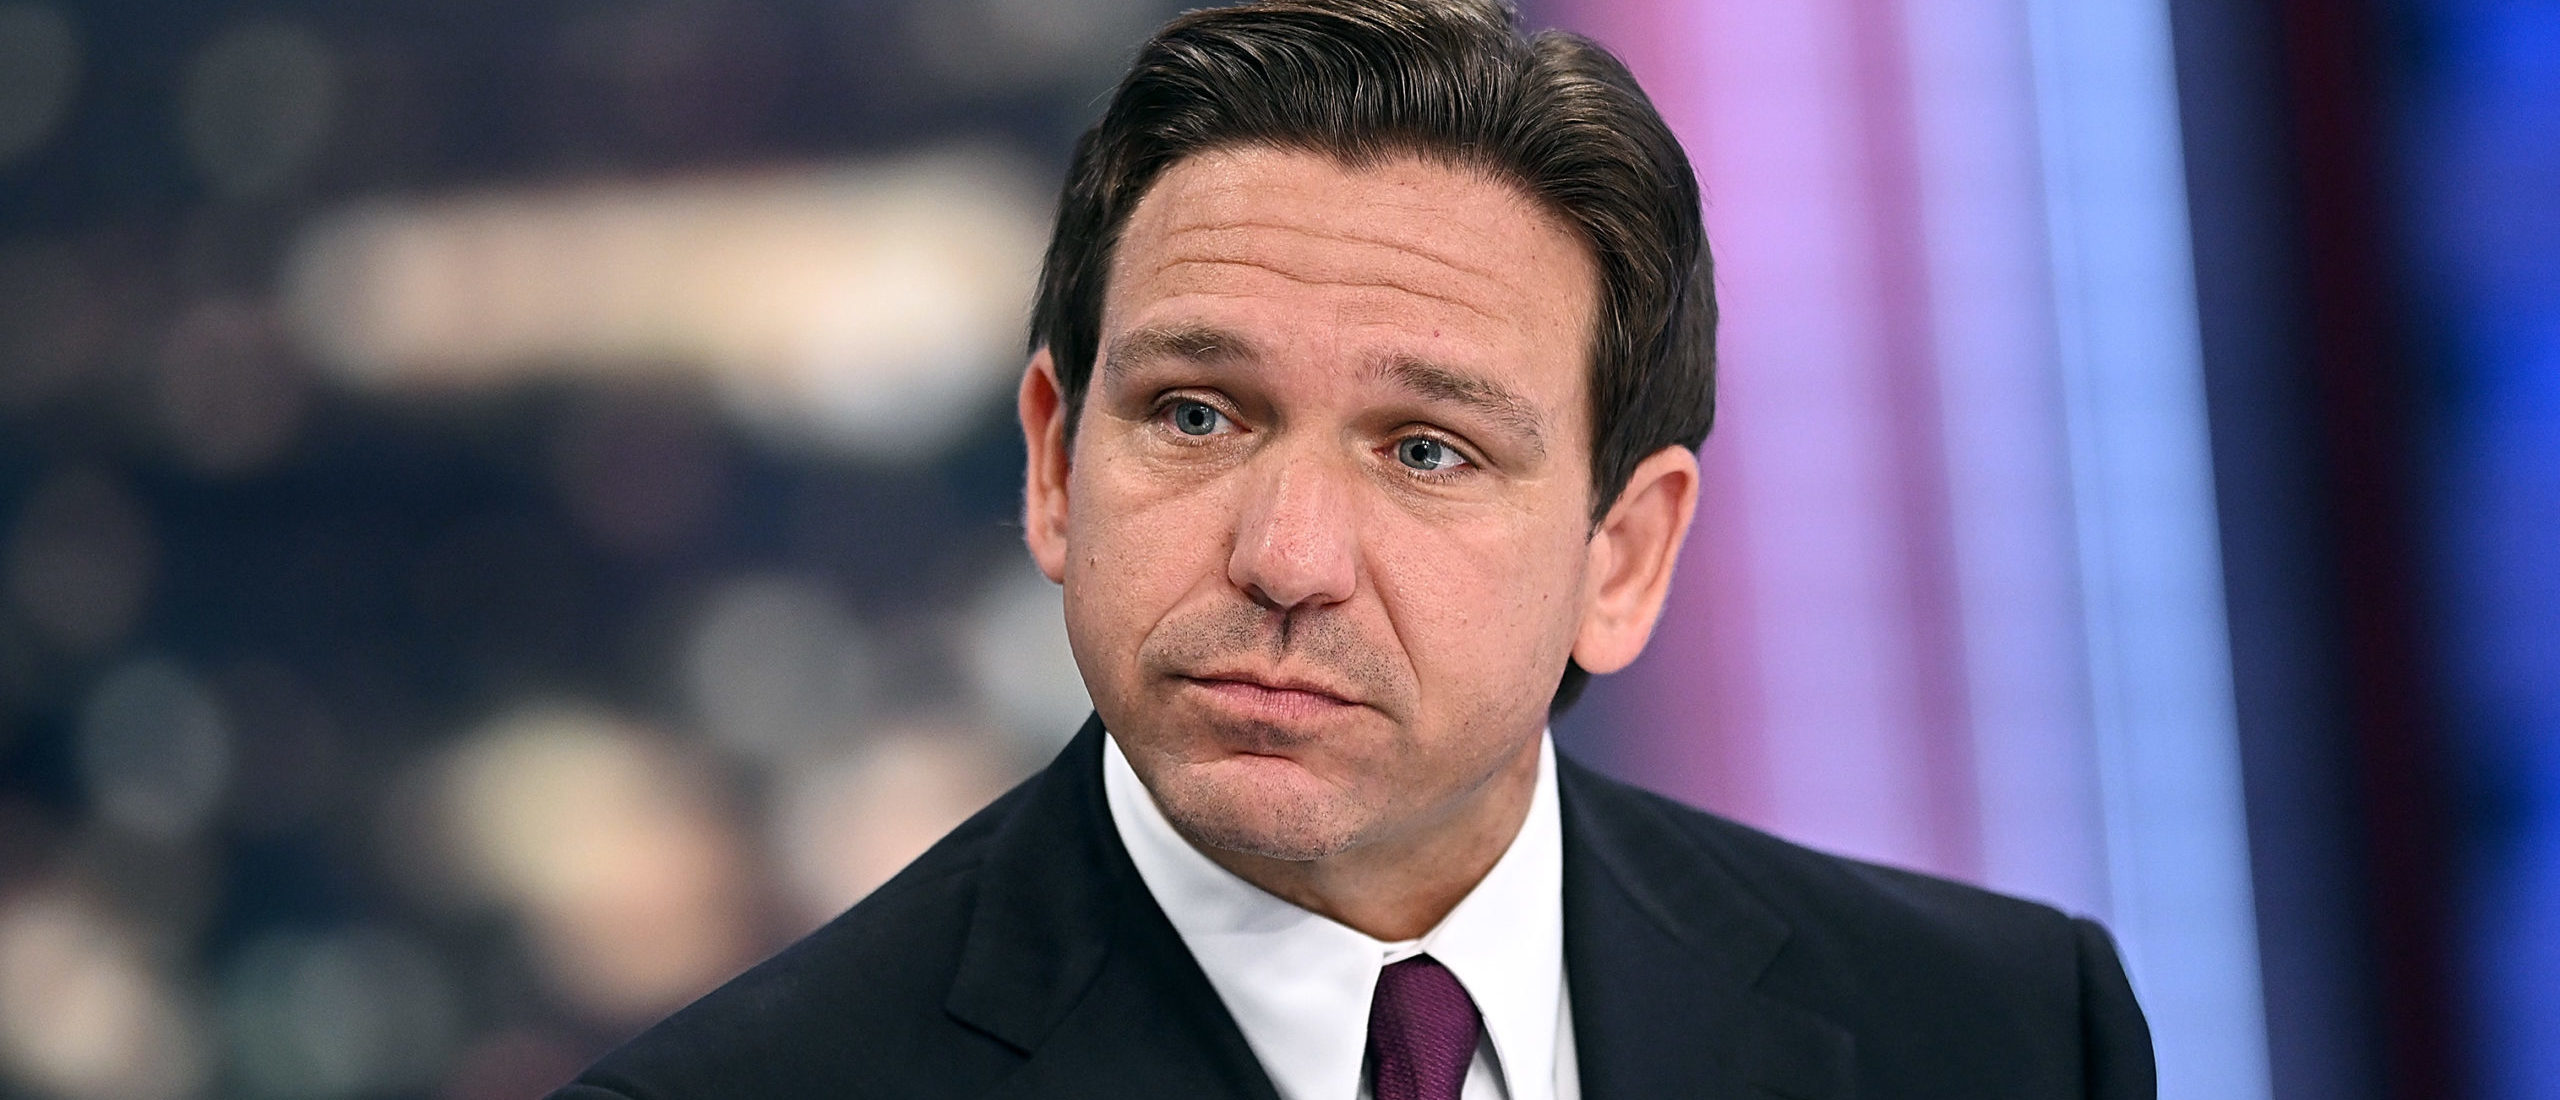 NEW YORK, NEW YORK - SEPTEMBER 13: Florida Governor Ron DeSantis attends a live taping of Hannity at Fox News Channel Studios on September 13, 2023 in New York City. (Photo by Steven Ferdman/Getty Images)